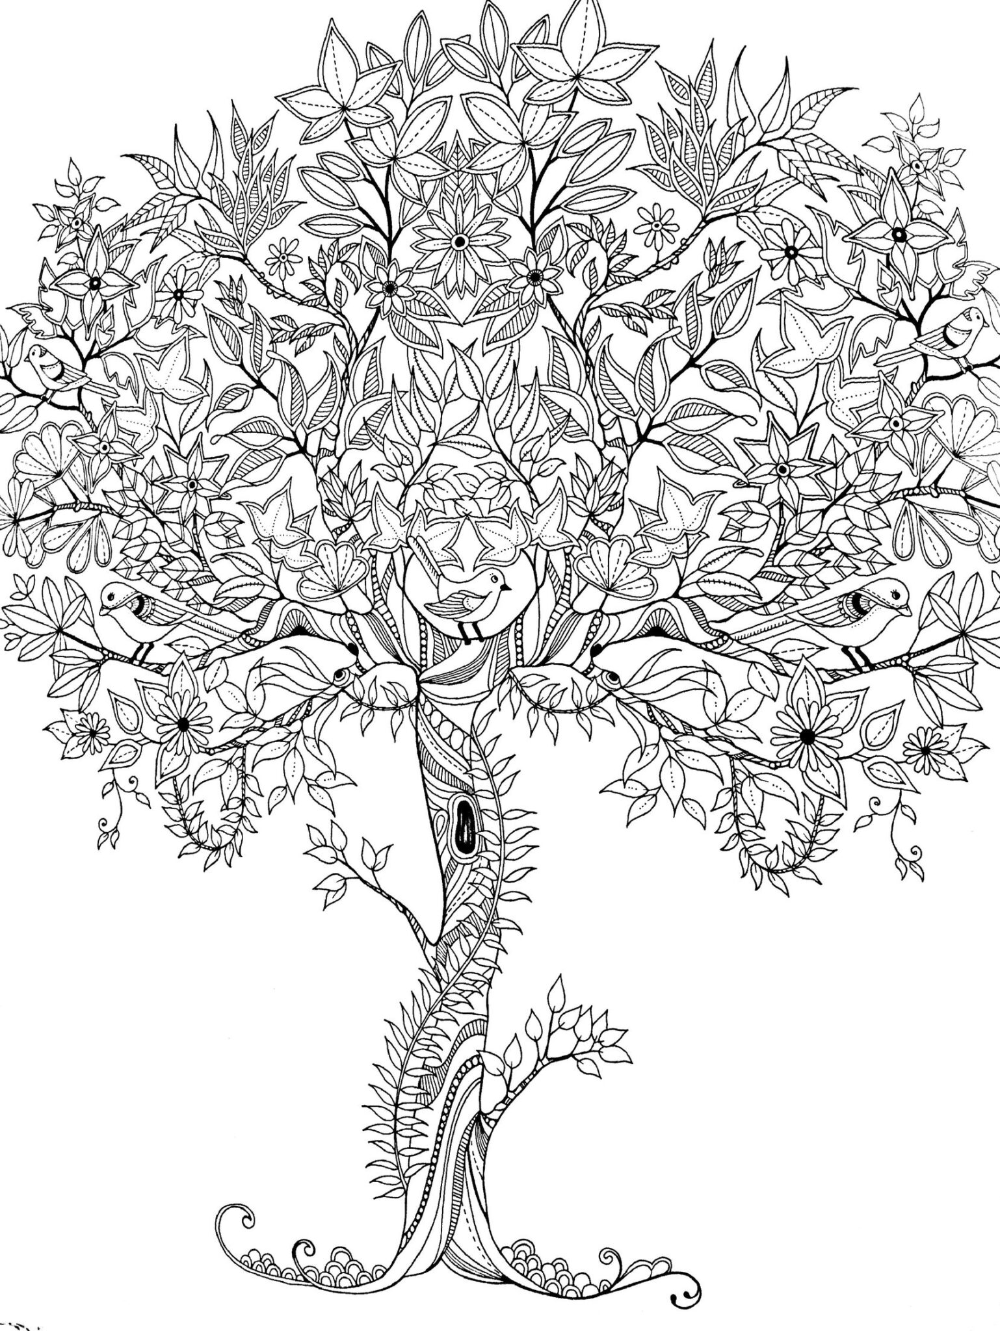 Trees coloring books adultcoloringbookz tree coloring page detailed coloring pages free coloring pages